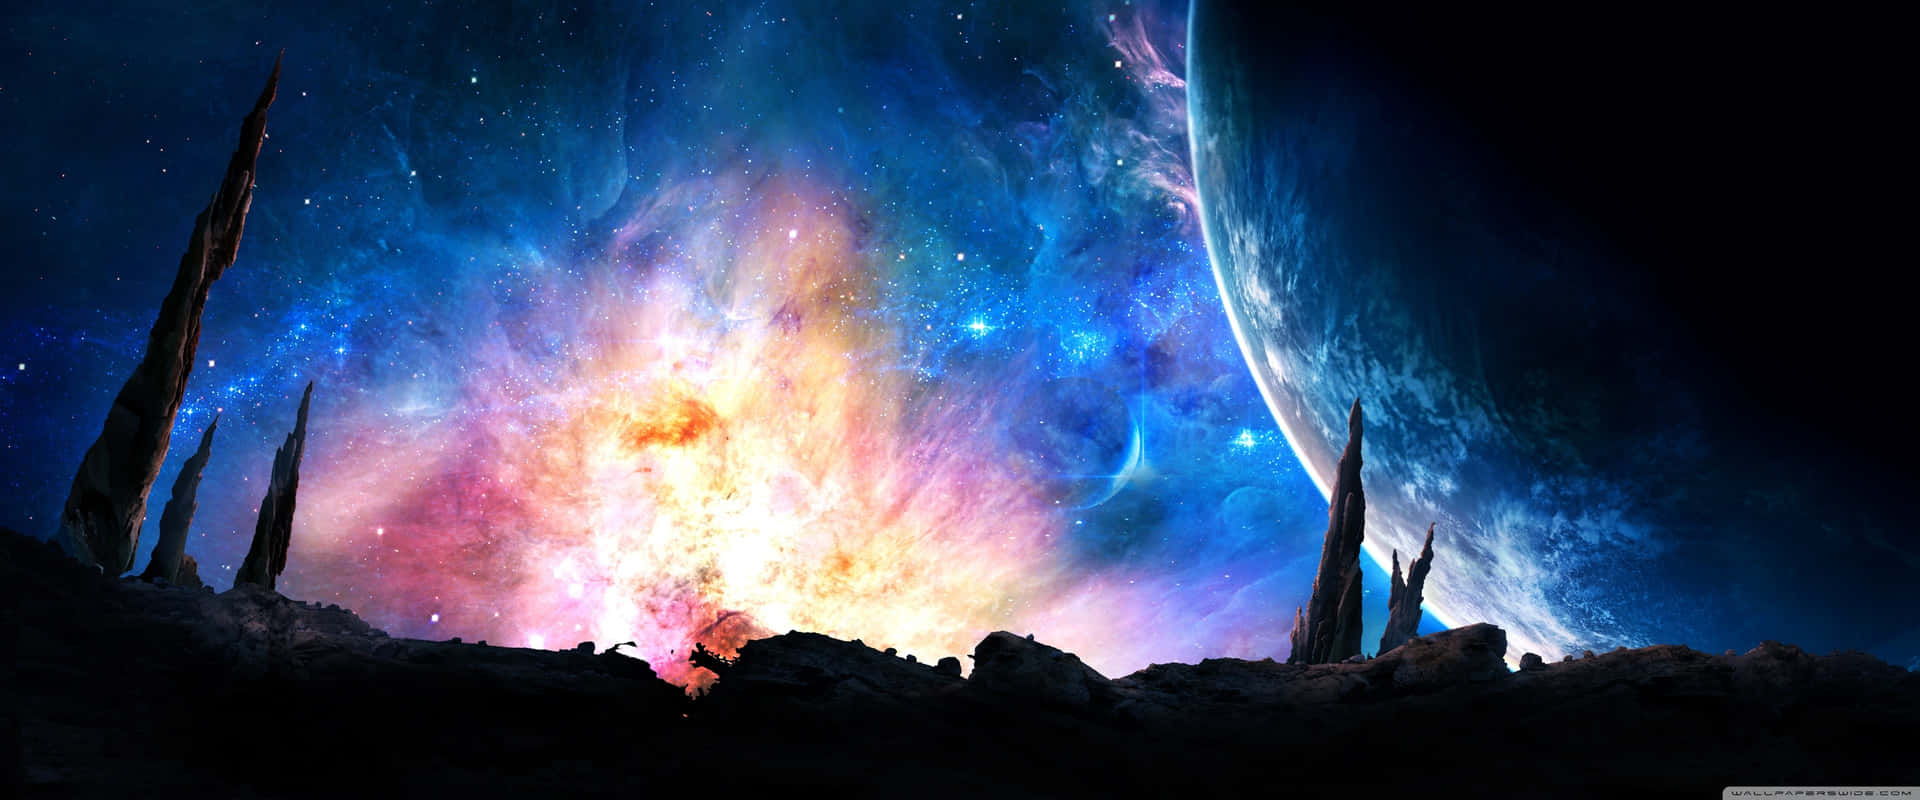 A Colorful Space Scene With A Planet And Stars Wallpaper